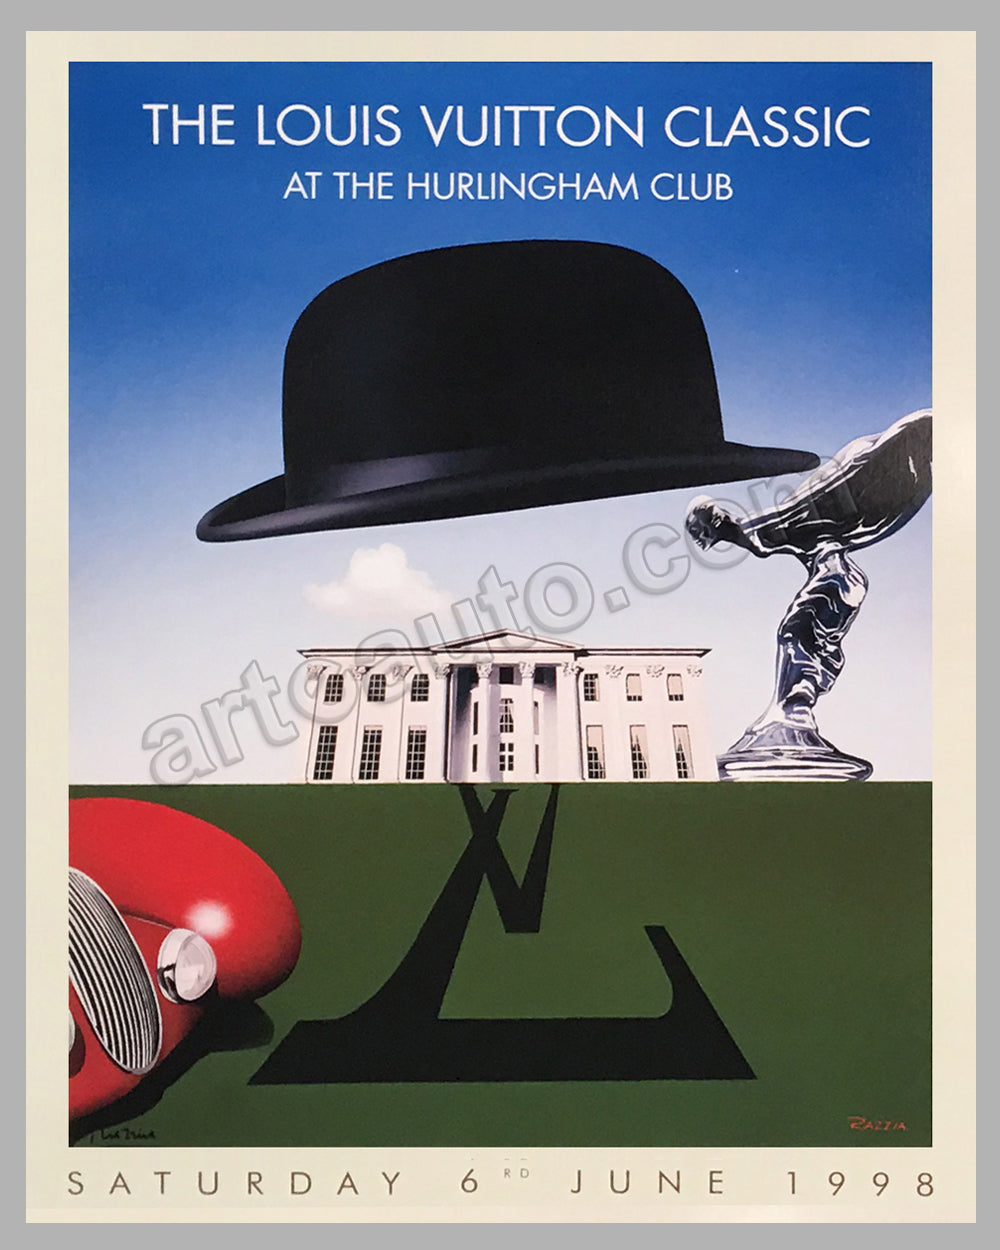 Louis Vuitton Classic at the Hurlingham Club 1998 large poster by Razzia